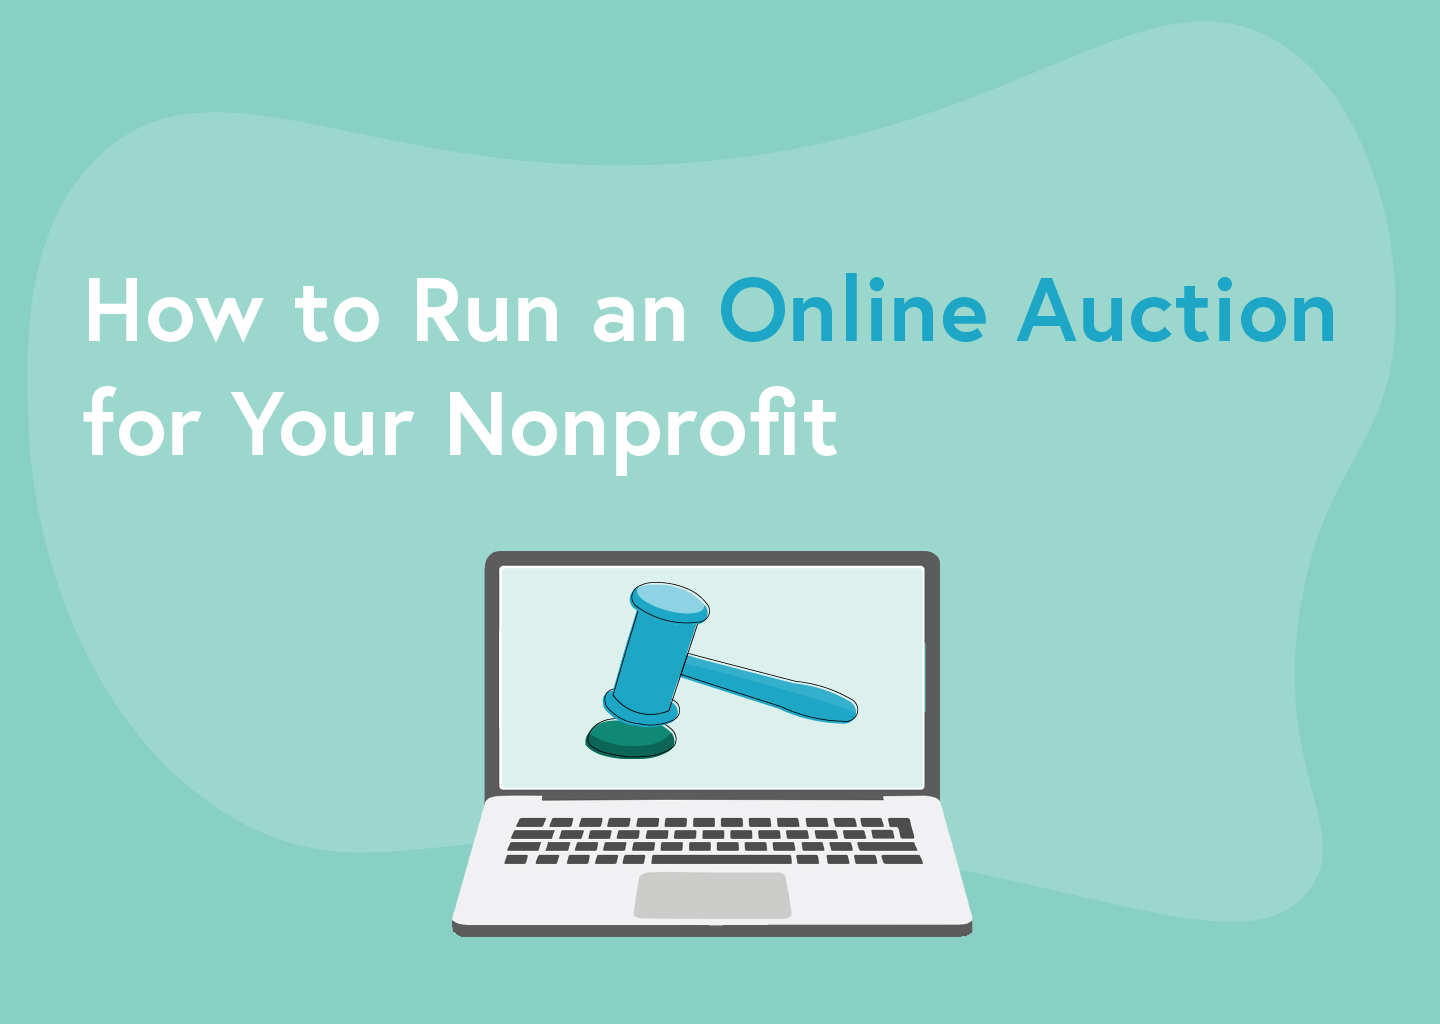 A Complete Guide to Online Auctions for Nonprofits